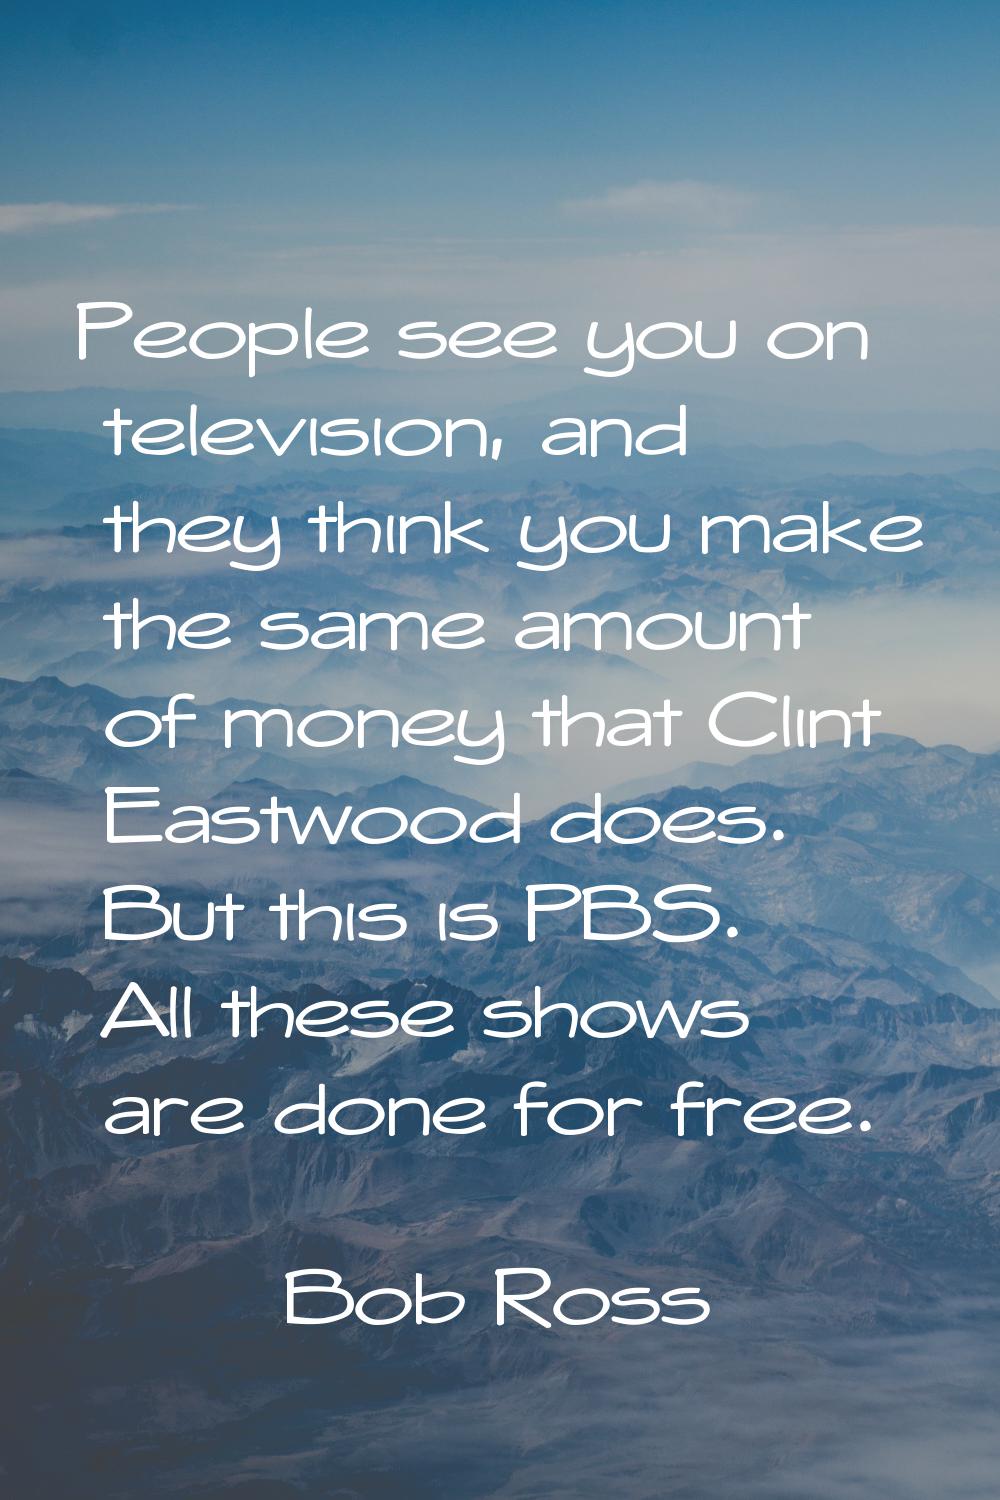 People see you on television, and they think you make the same amount of money that Clint Eastwood 